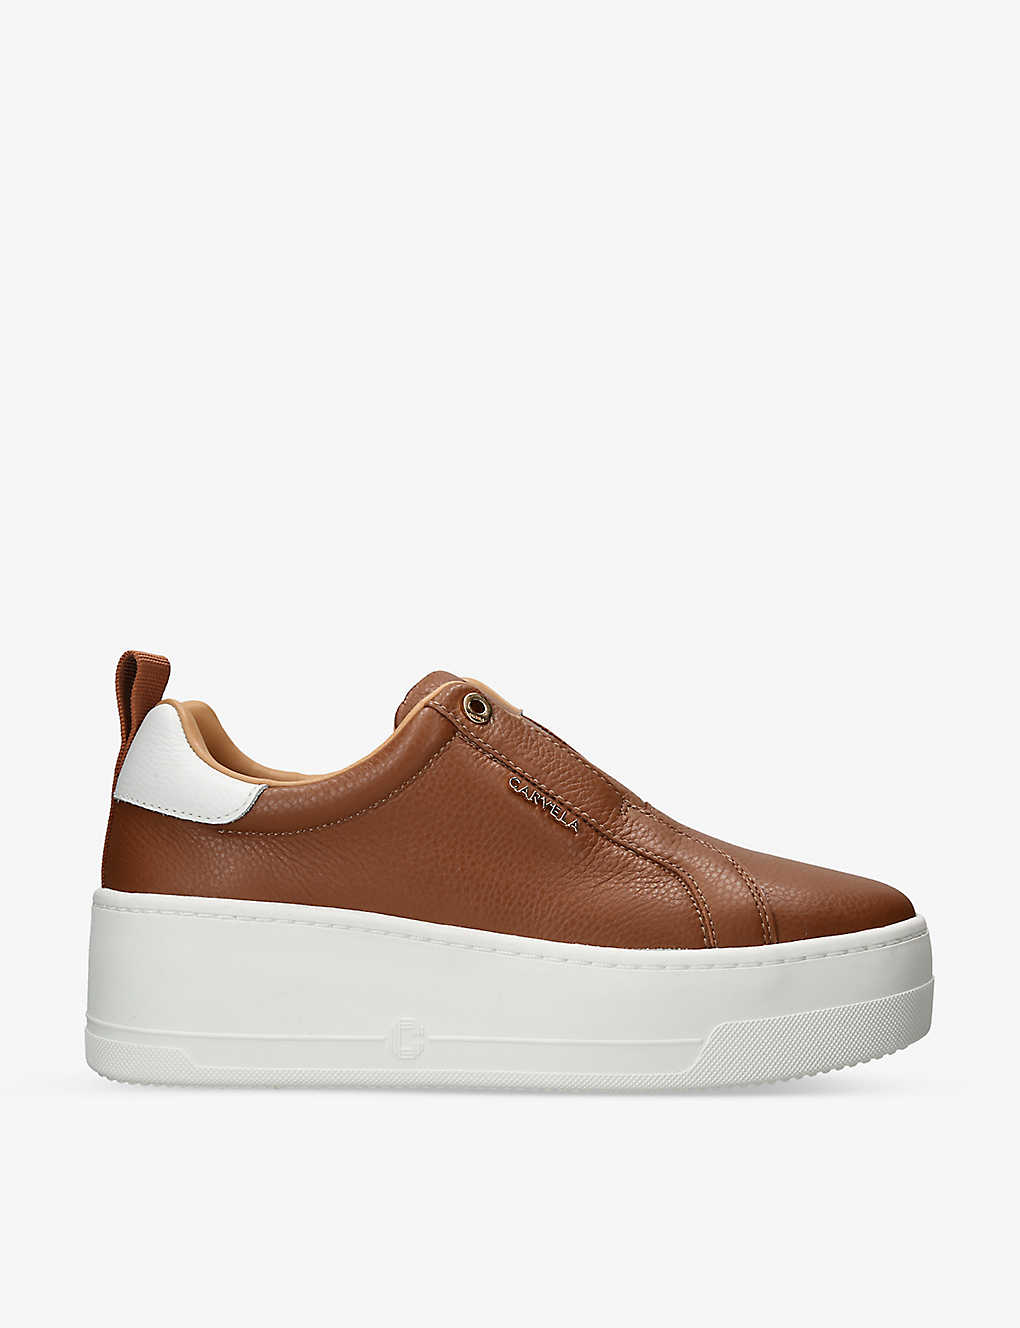 Carvela Womens Tan Connected Laceless Platform Leather Trainers